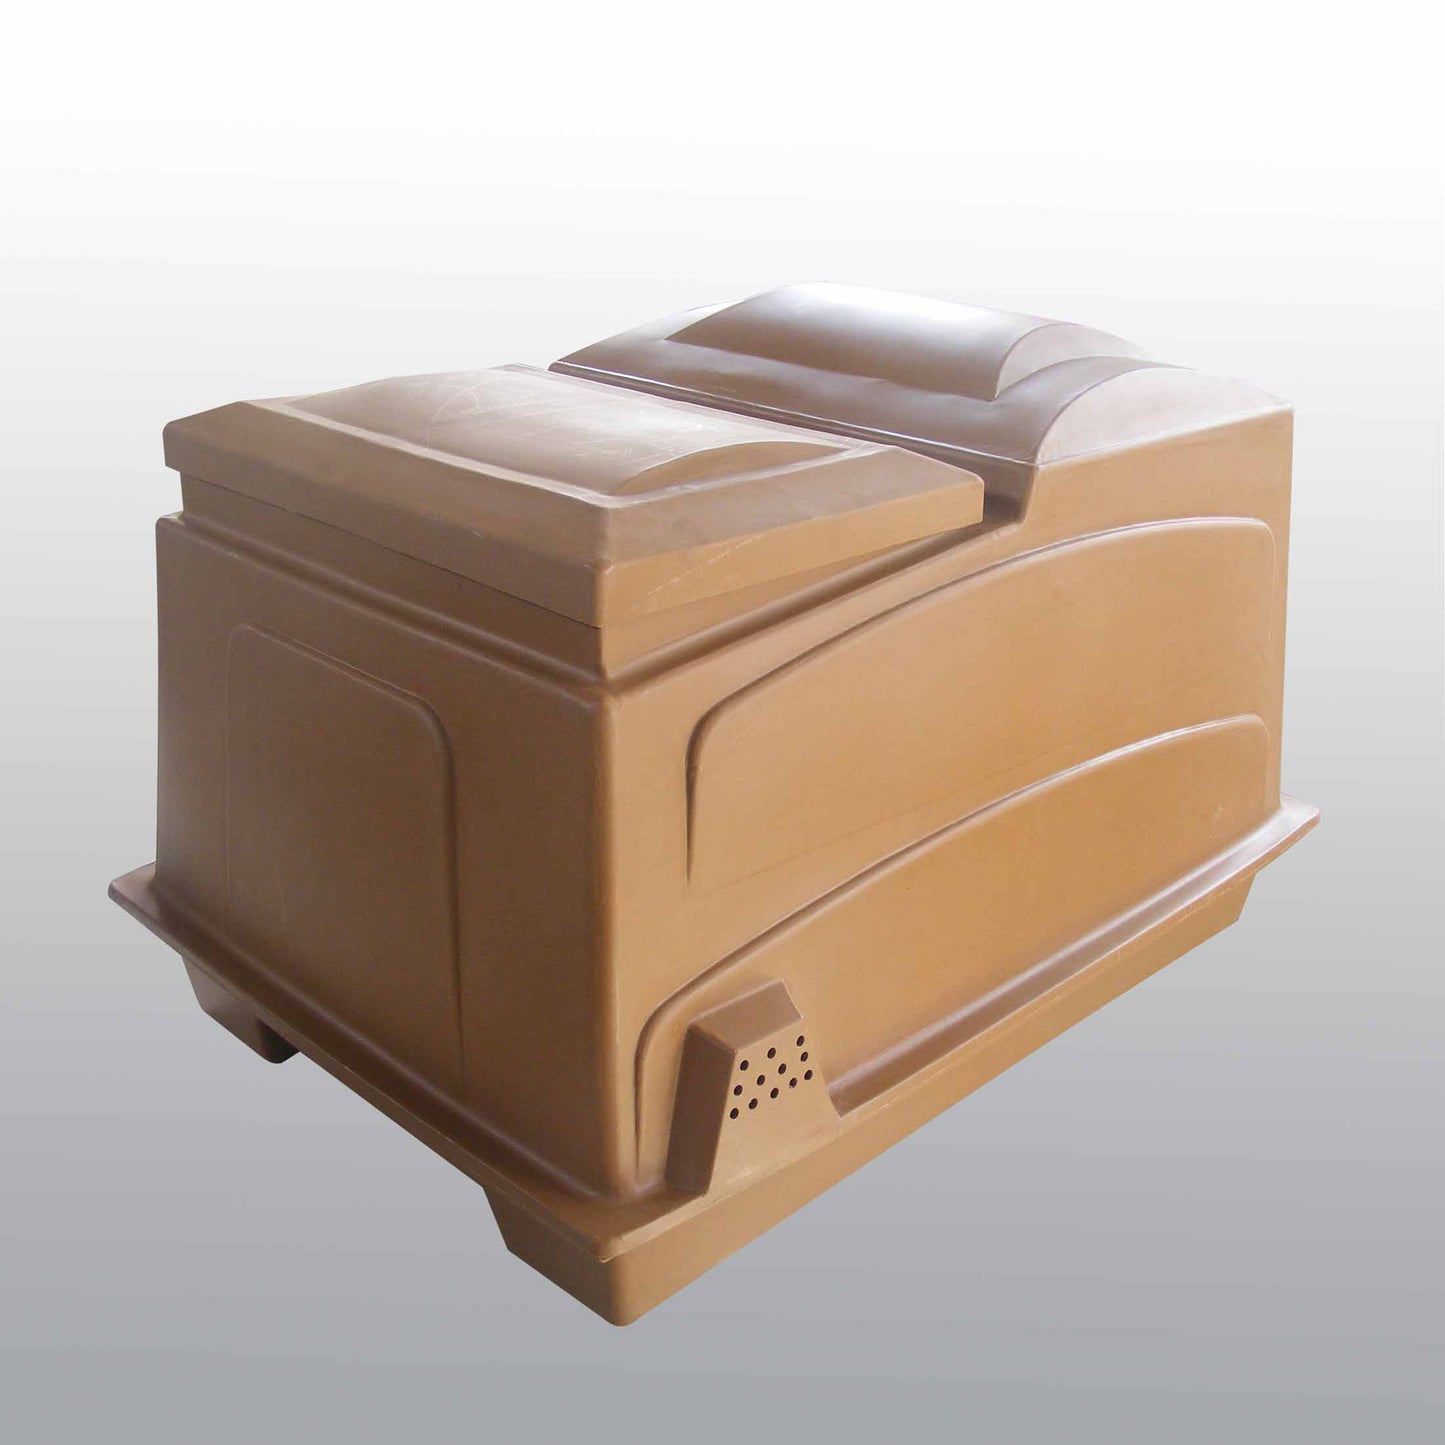 2 in 1 Combi Filter Box With Base - Brown